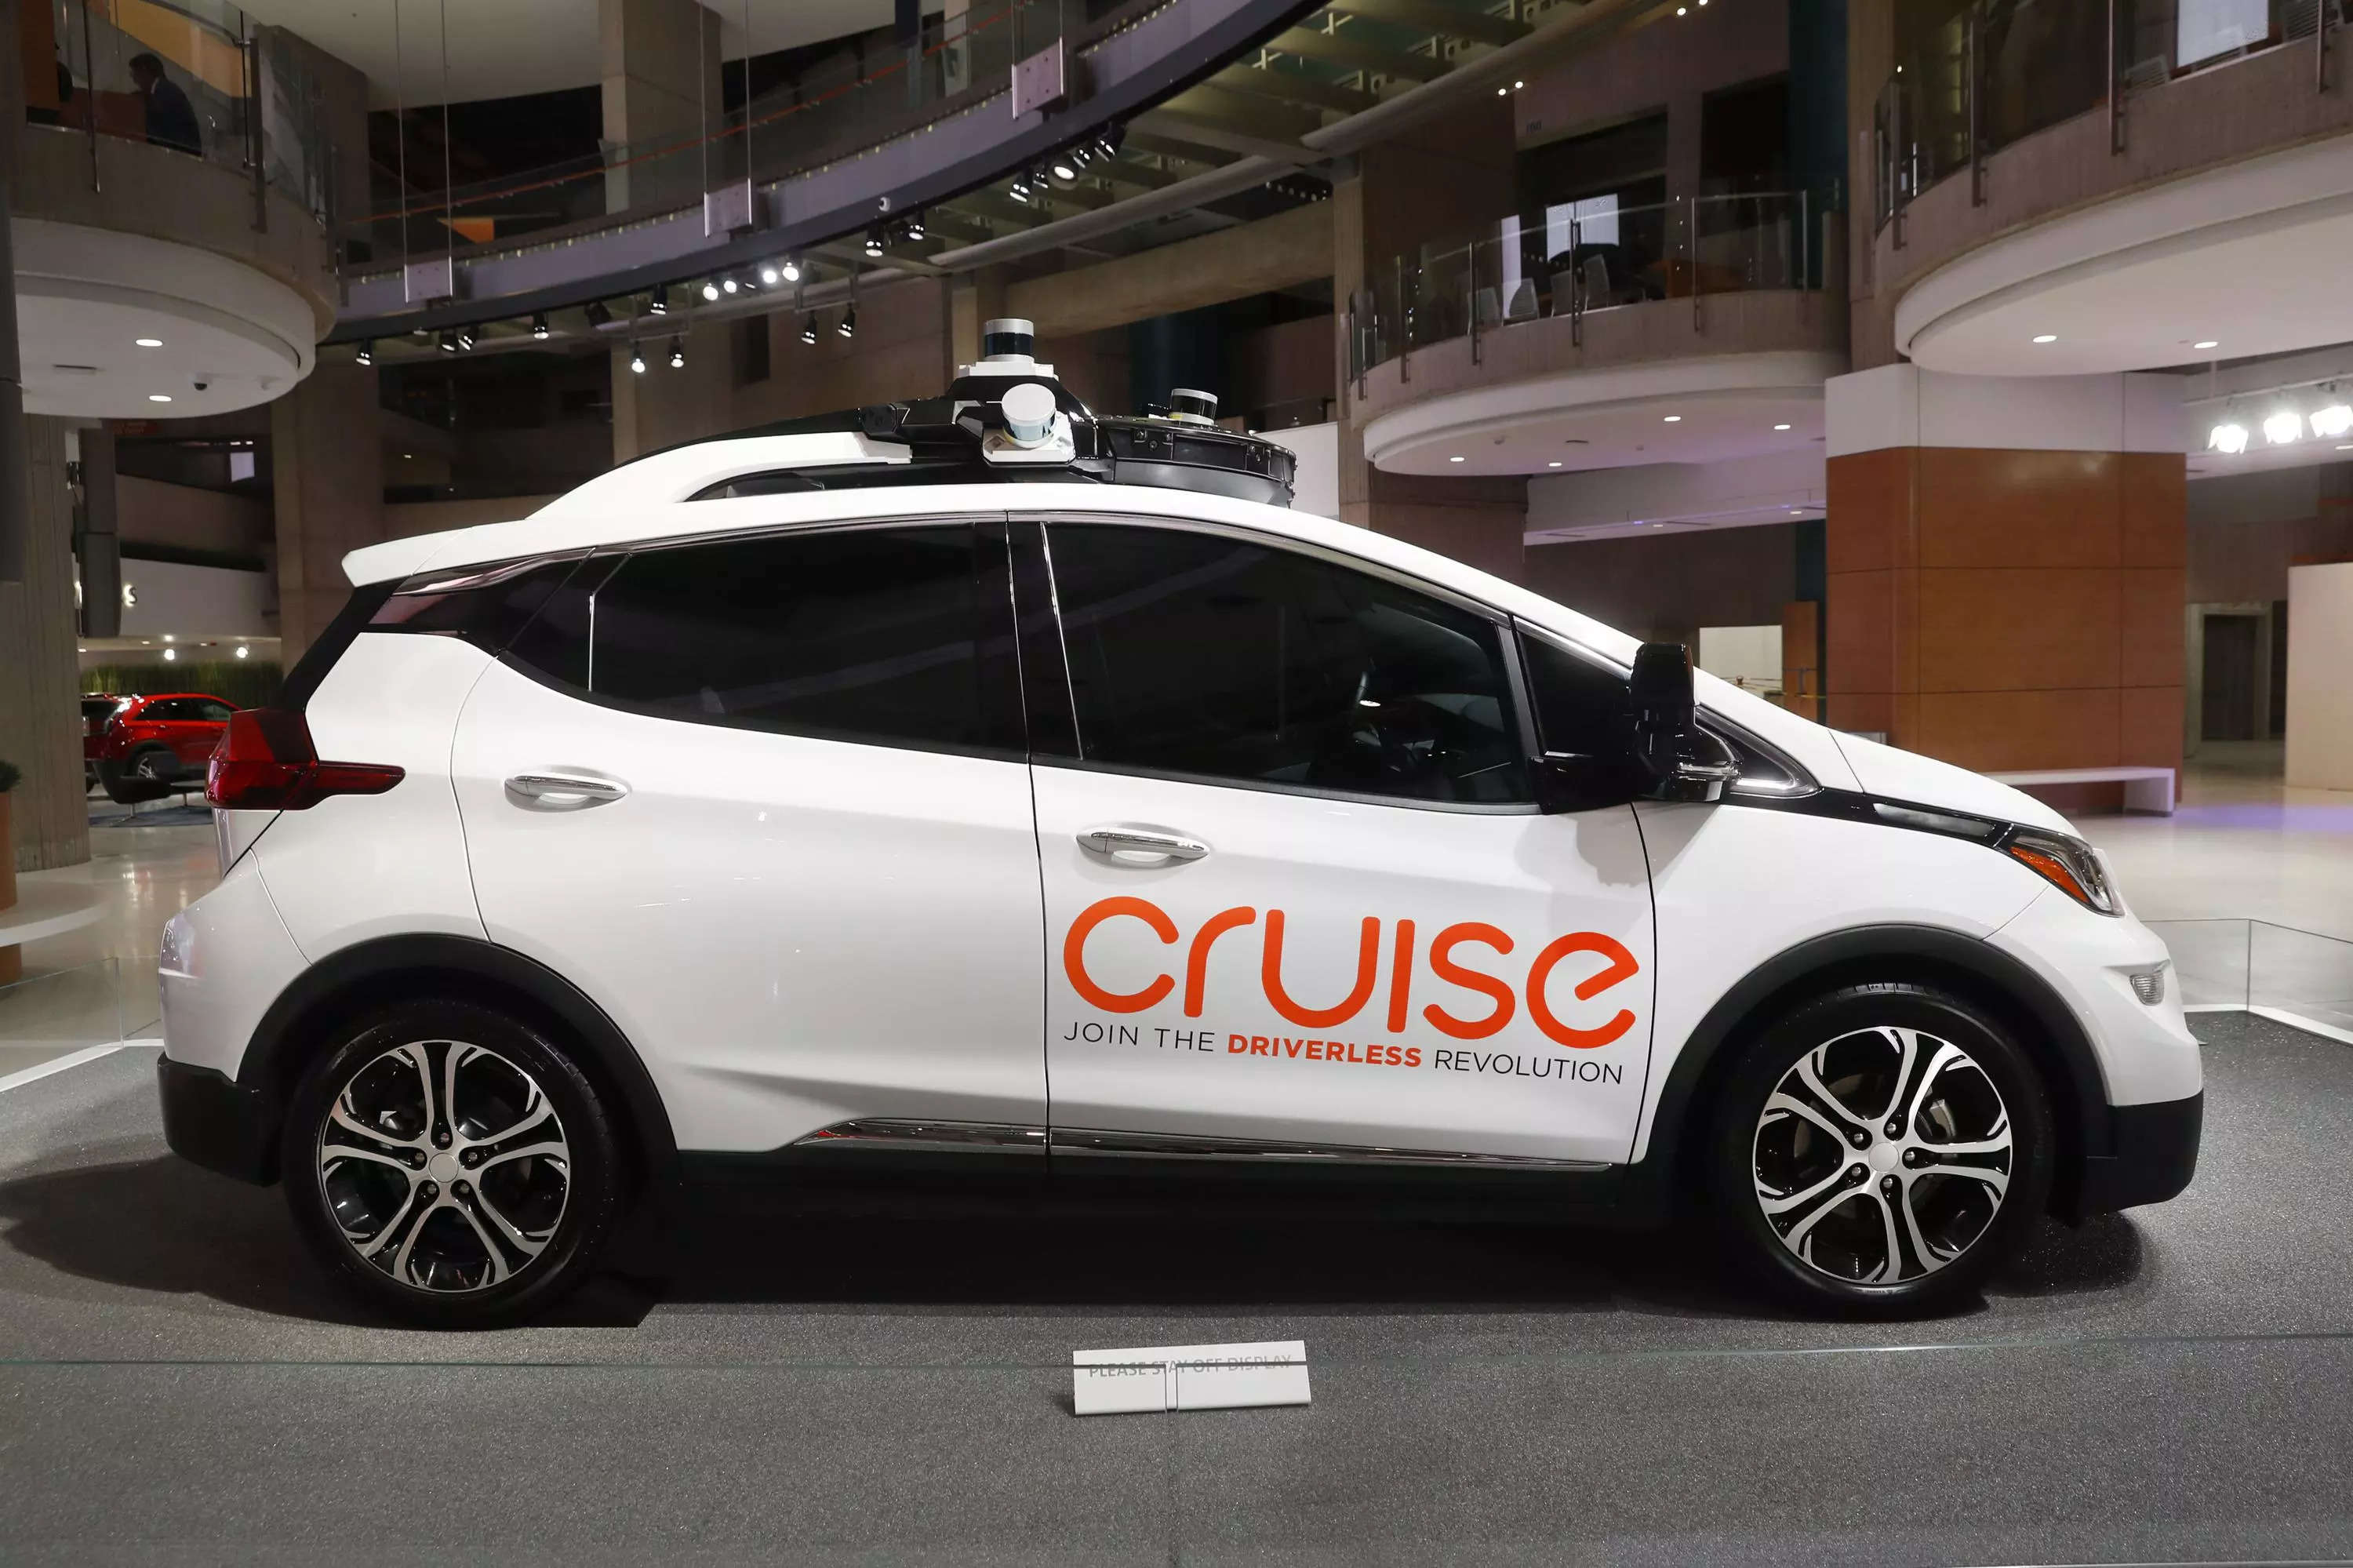  Cruise is operating a small fleet of autonomous-vehicle in San Francisco that it opened to the general public at the beginning of February.